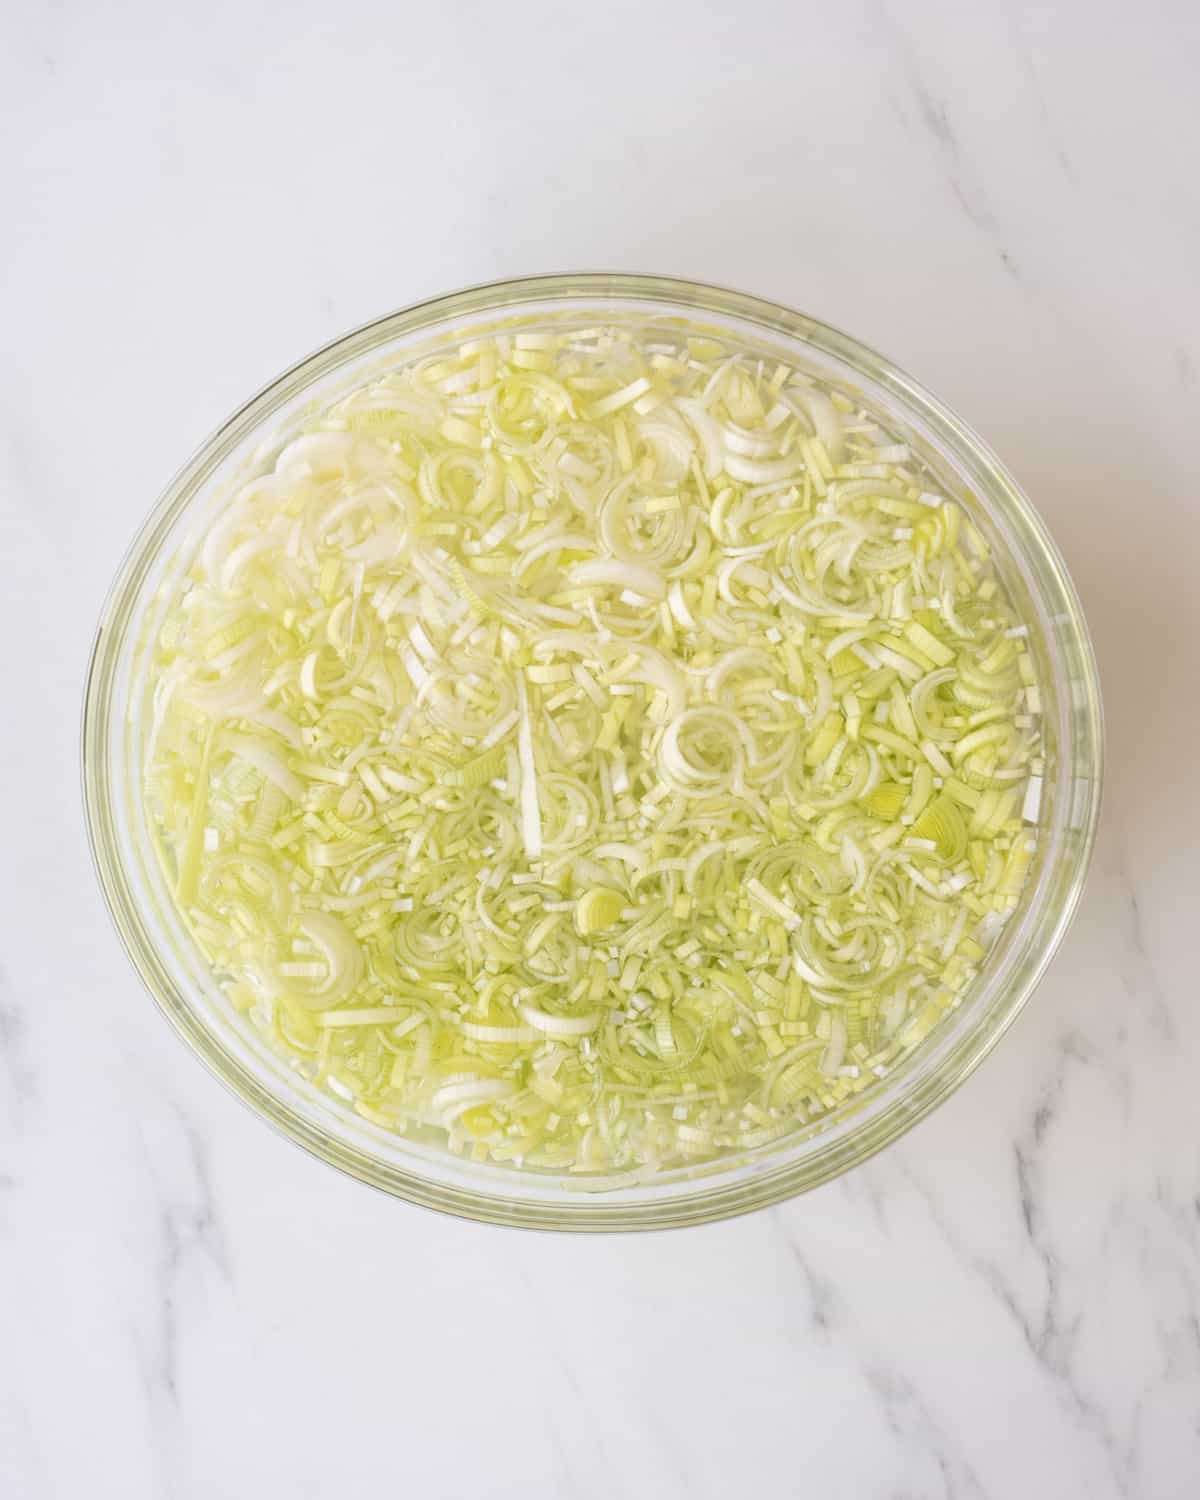 A clear bowl of chopped leeks in cold water on a white countertop.